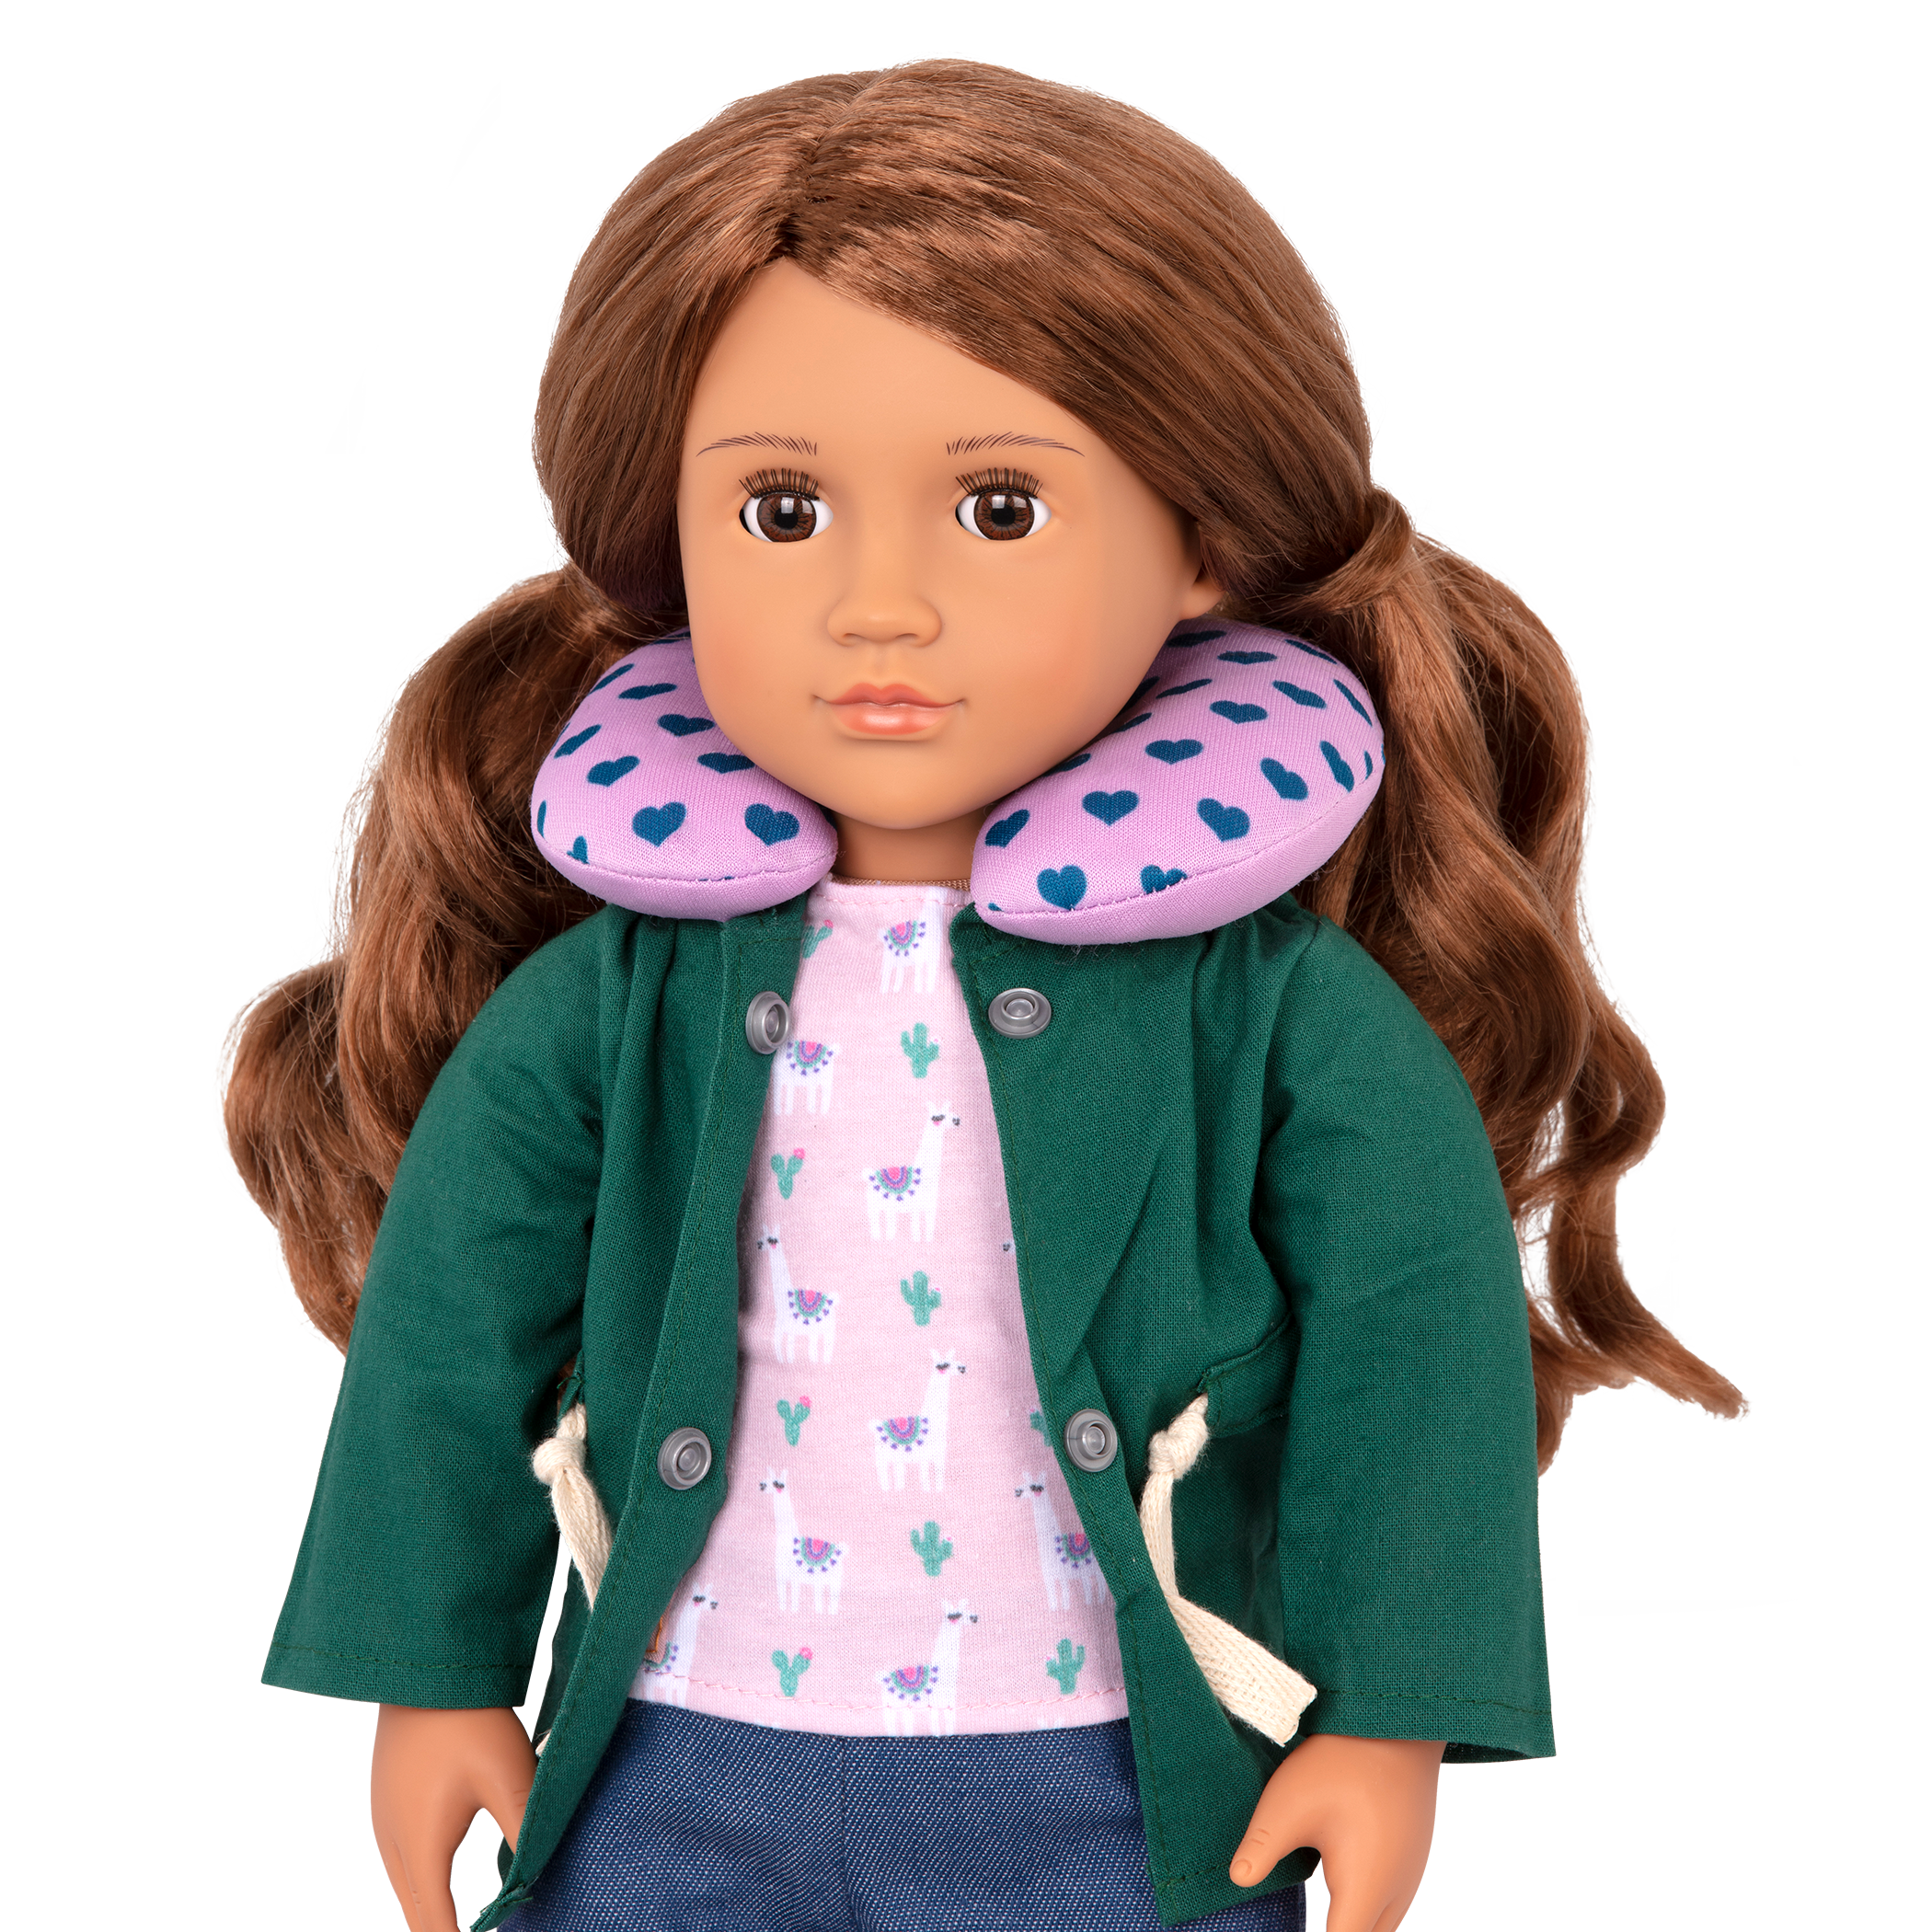 18-inch doll with travel playset